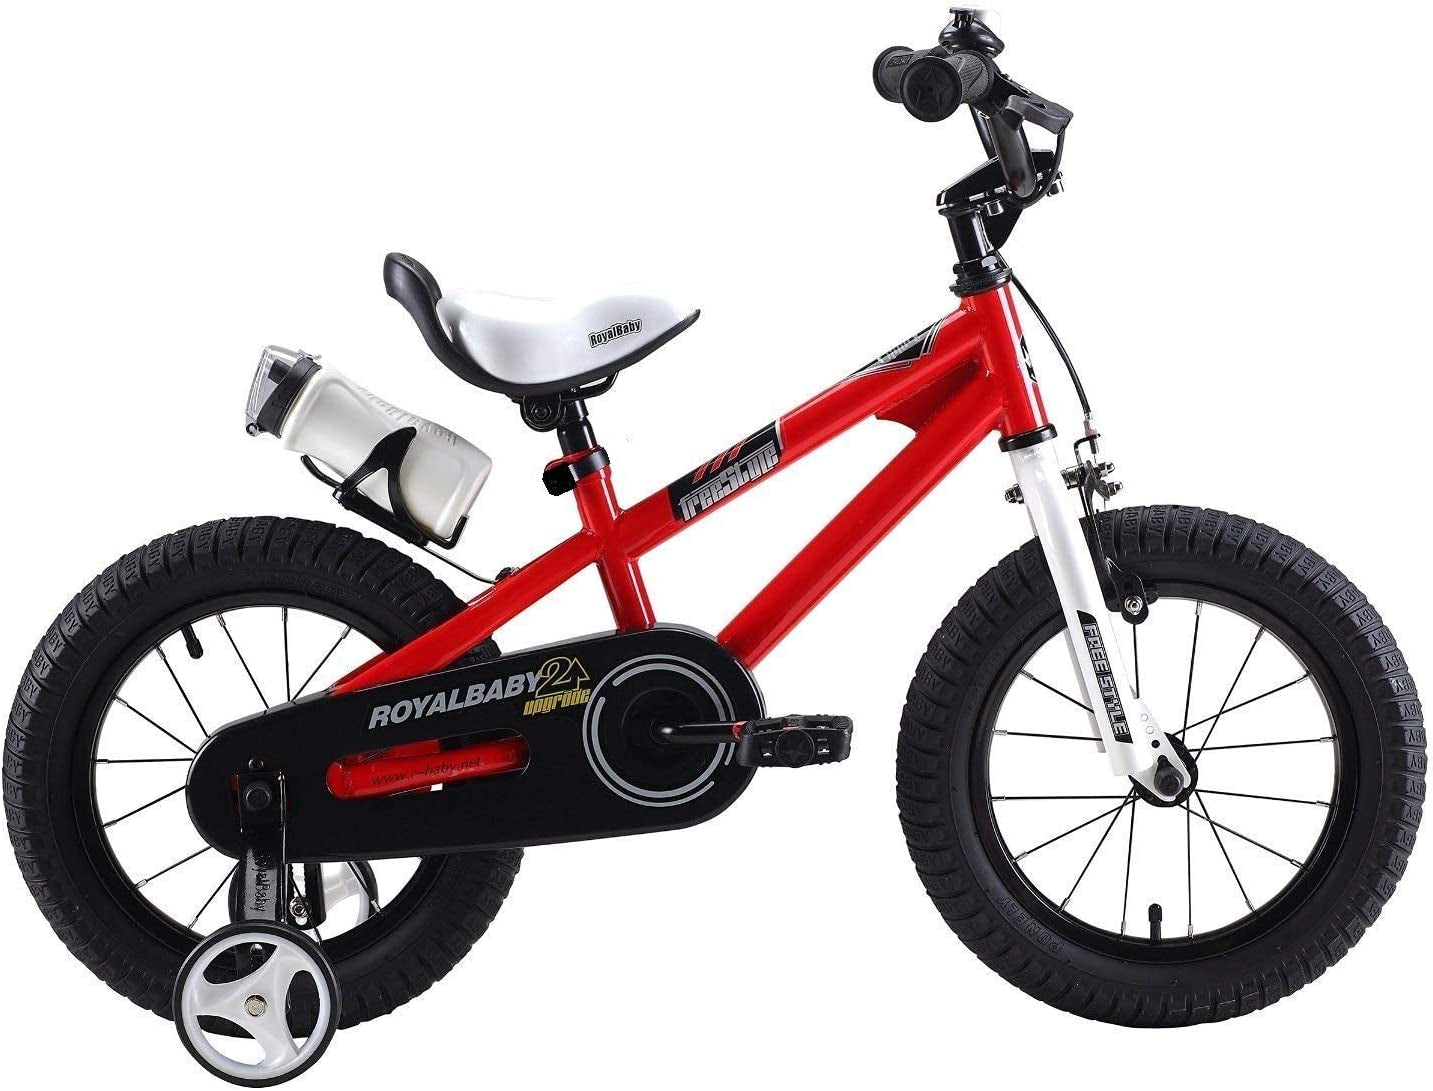 Freestyle Boy’S Girl’S Kids Children Child Bike Bicycle 6 Colours, 12”, 14”, 16”, 18” with Stabilisers, Water Bottle and Holder.